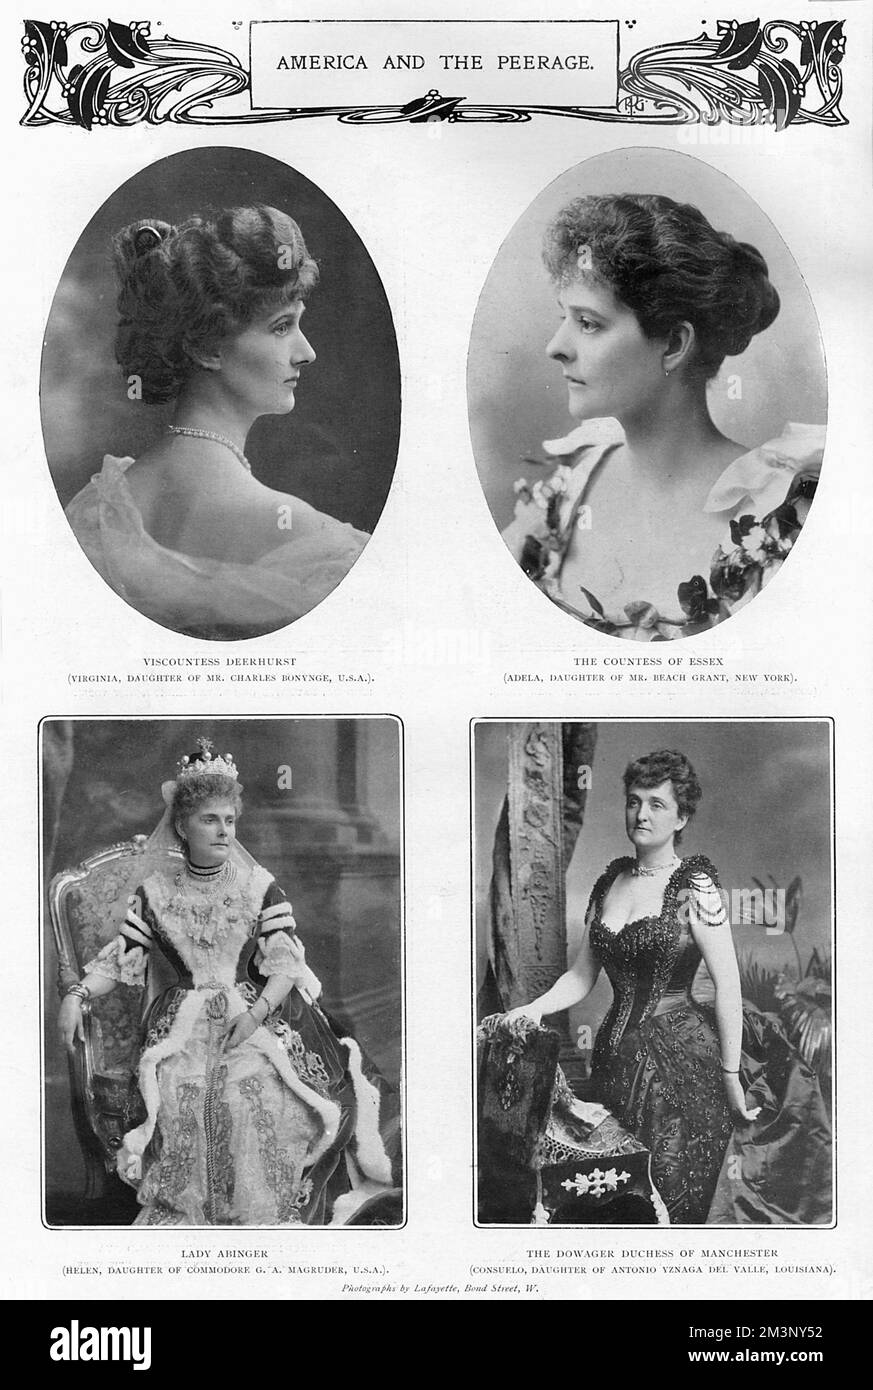 Page from a supplement of The Sketch magazine with four portraits of wealthy American heiresses, who married into the British aristocracy.  Clockwise from top left, Viscountess Deerhurst (Virginia, daughter of Mr Charles Bonynge), the Countess of Essex (Adela, daughter of Mr Beach Grant, New York), the Dowager Duchess of Manchester (Consuelo, daughter of Antonio Yznaga del Valle, Louisiana) and Lady Abinger (Helen, daughter of Commodore G. A. Magruder).       Date: 1903 Stock Photo